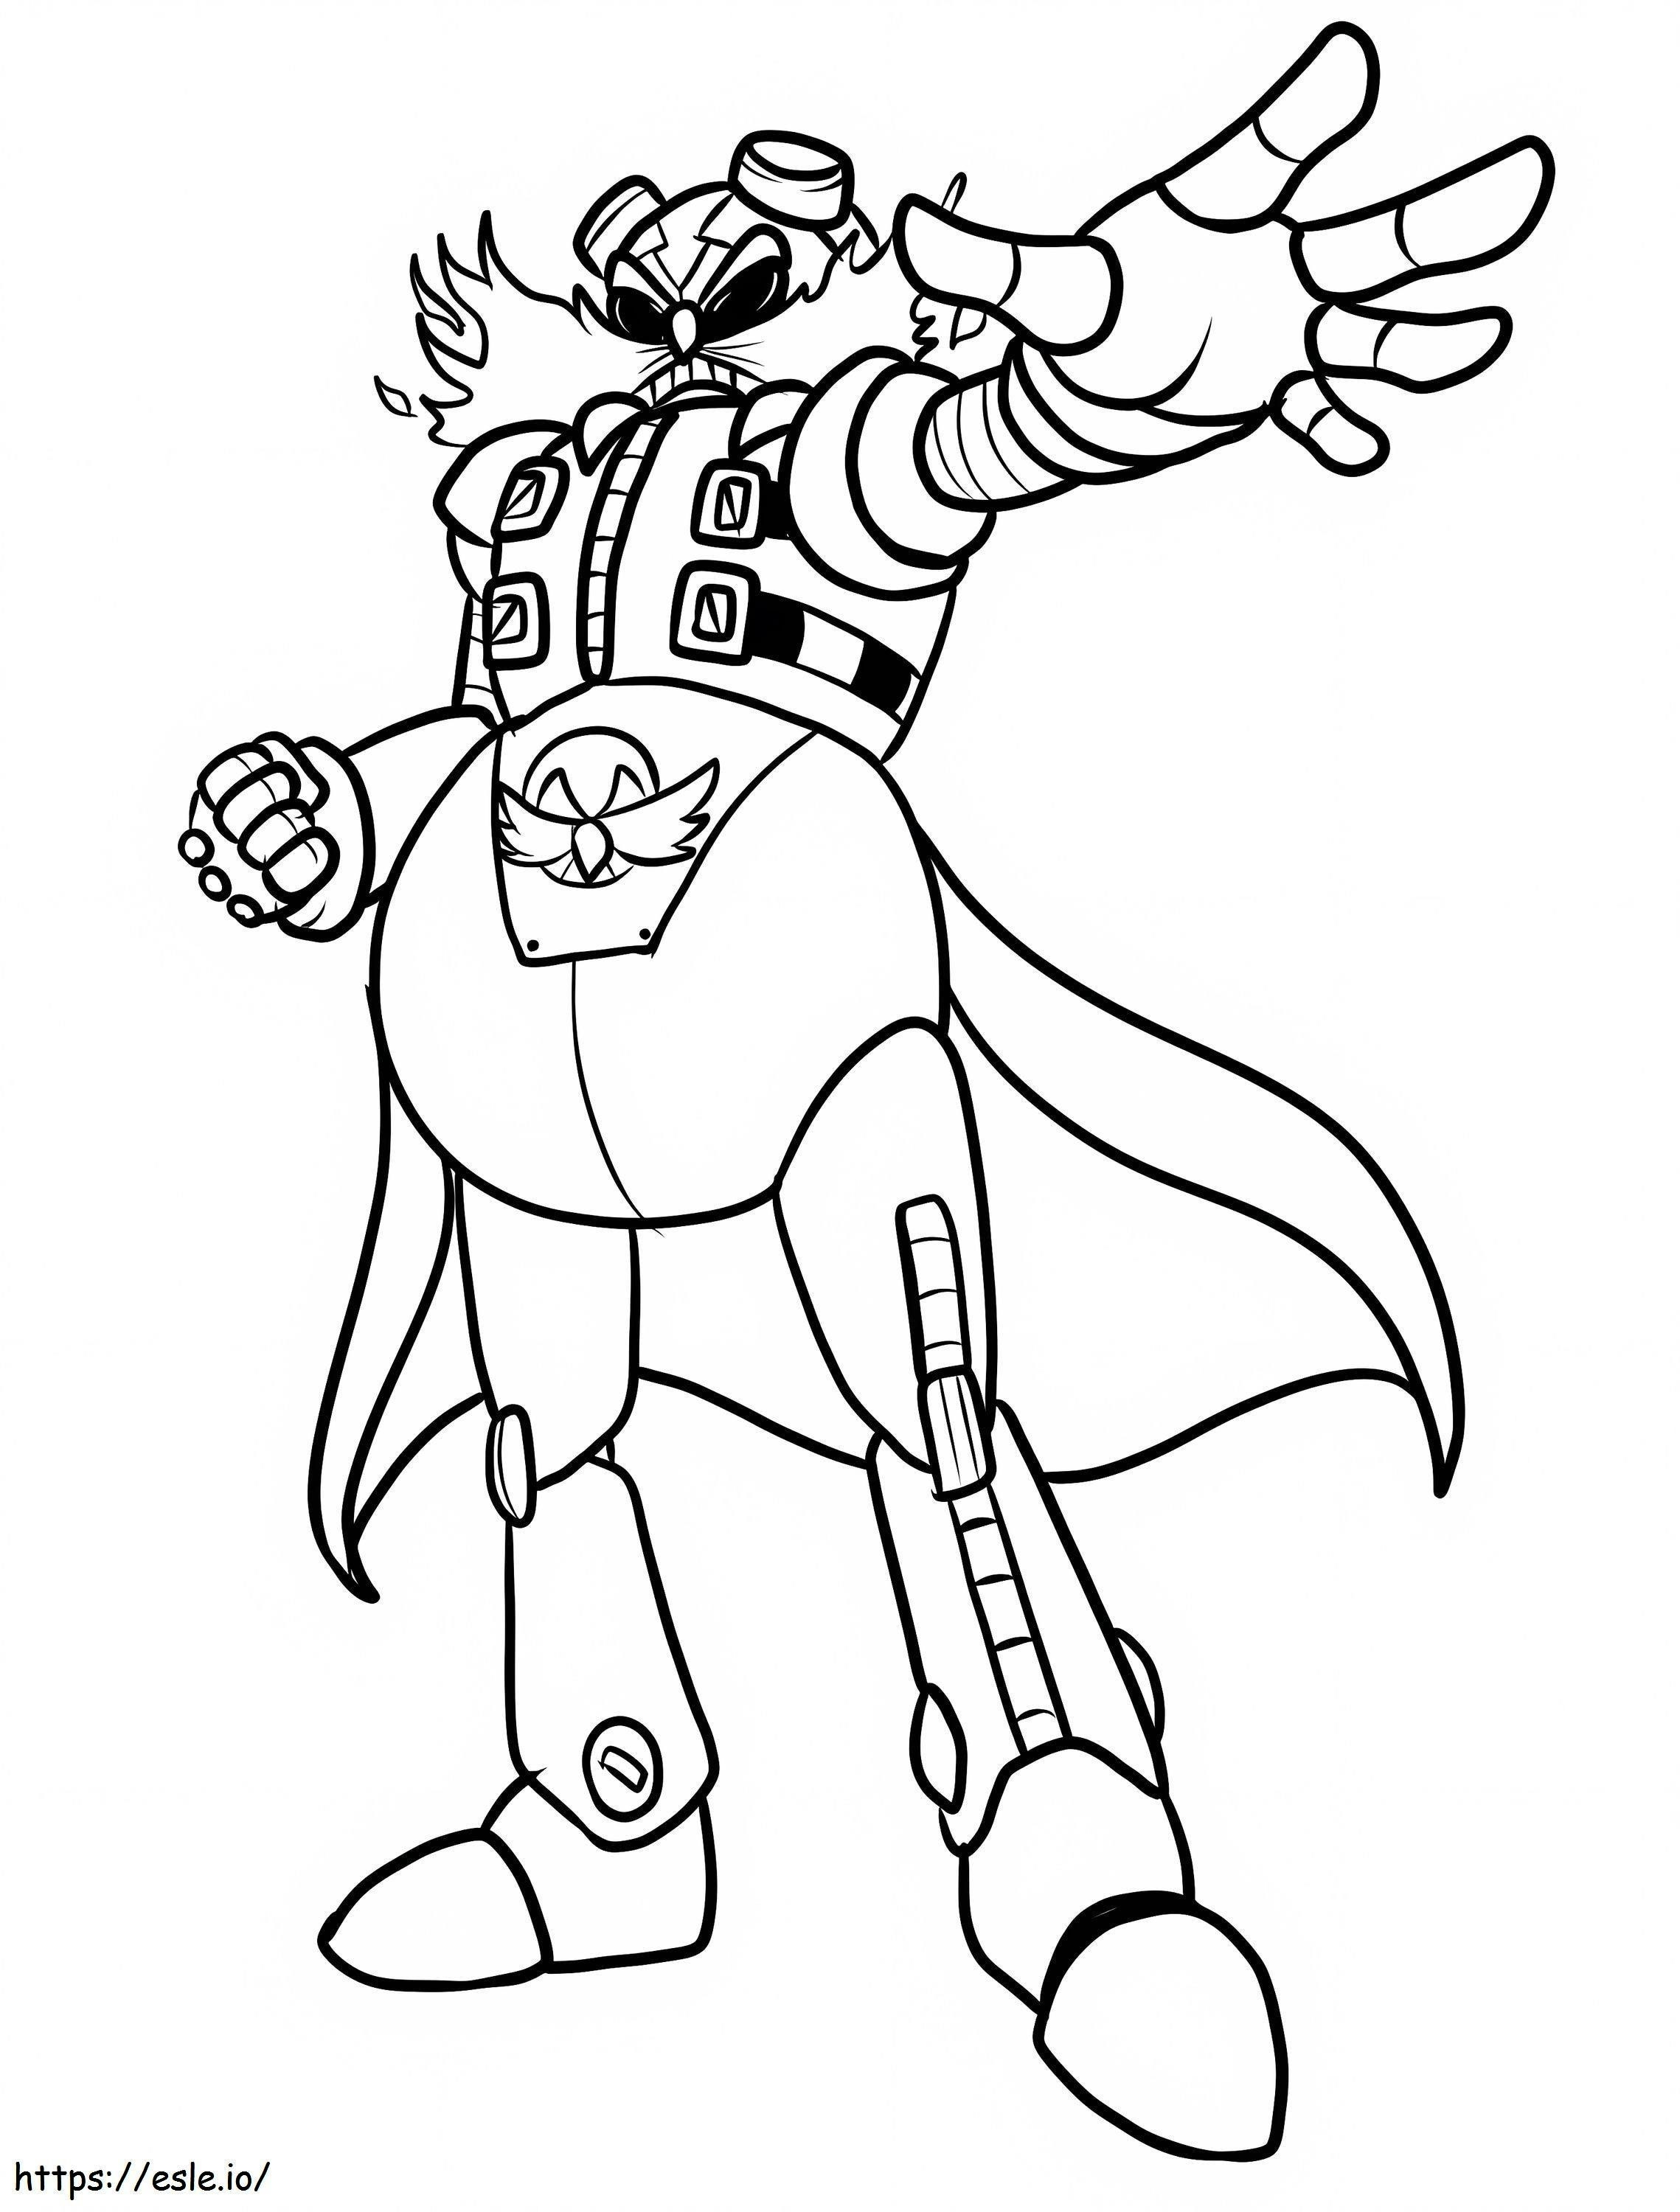 1573434146 Dt4Lpzlyc coloring page